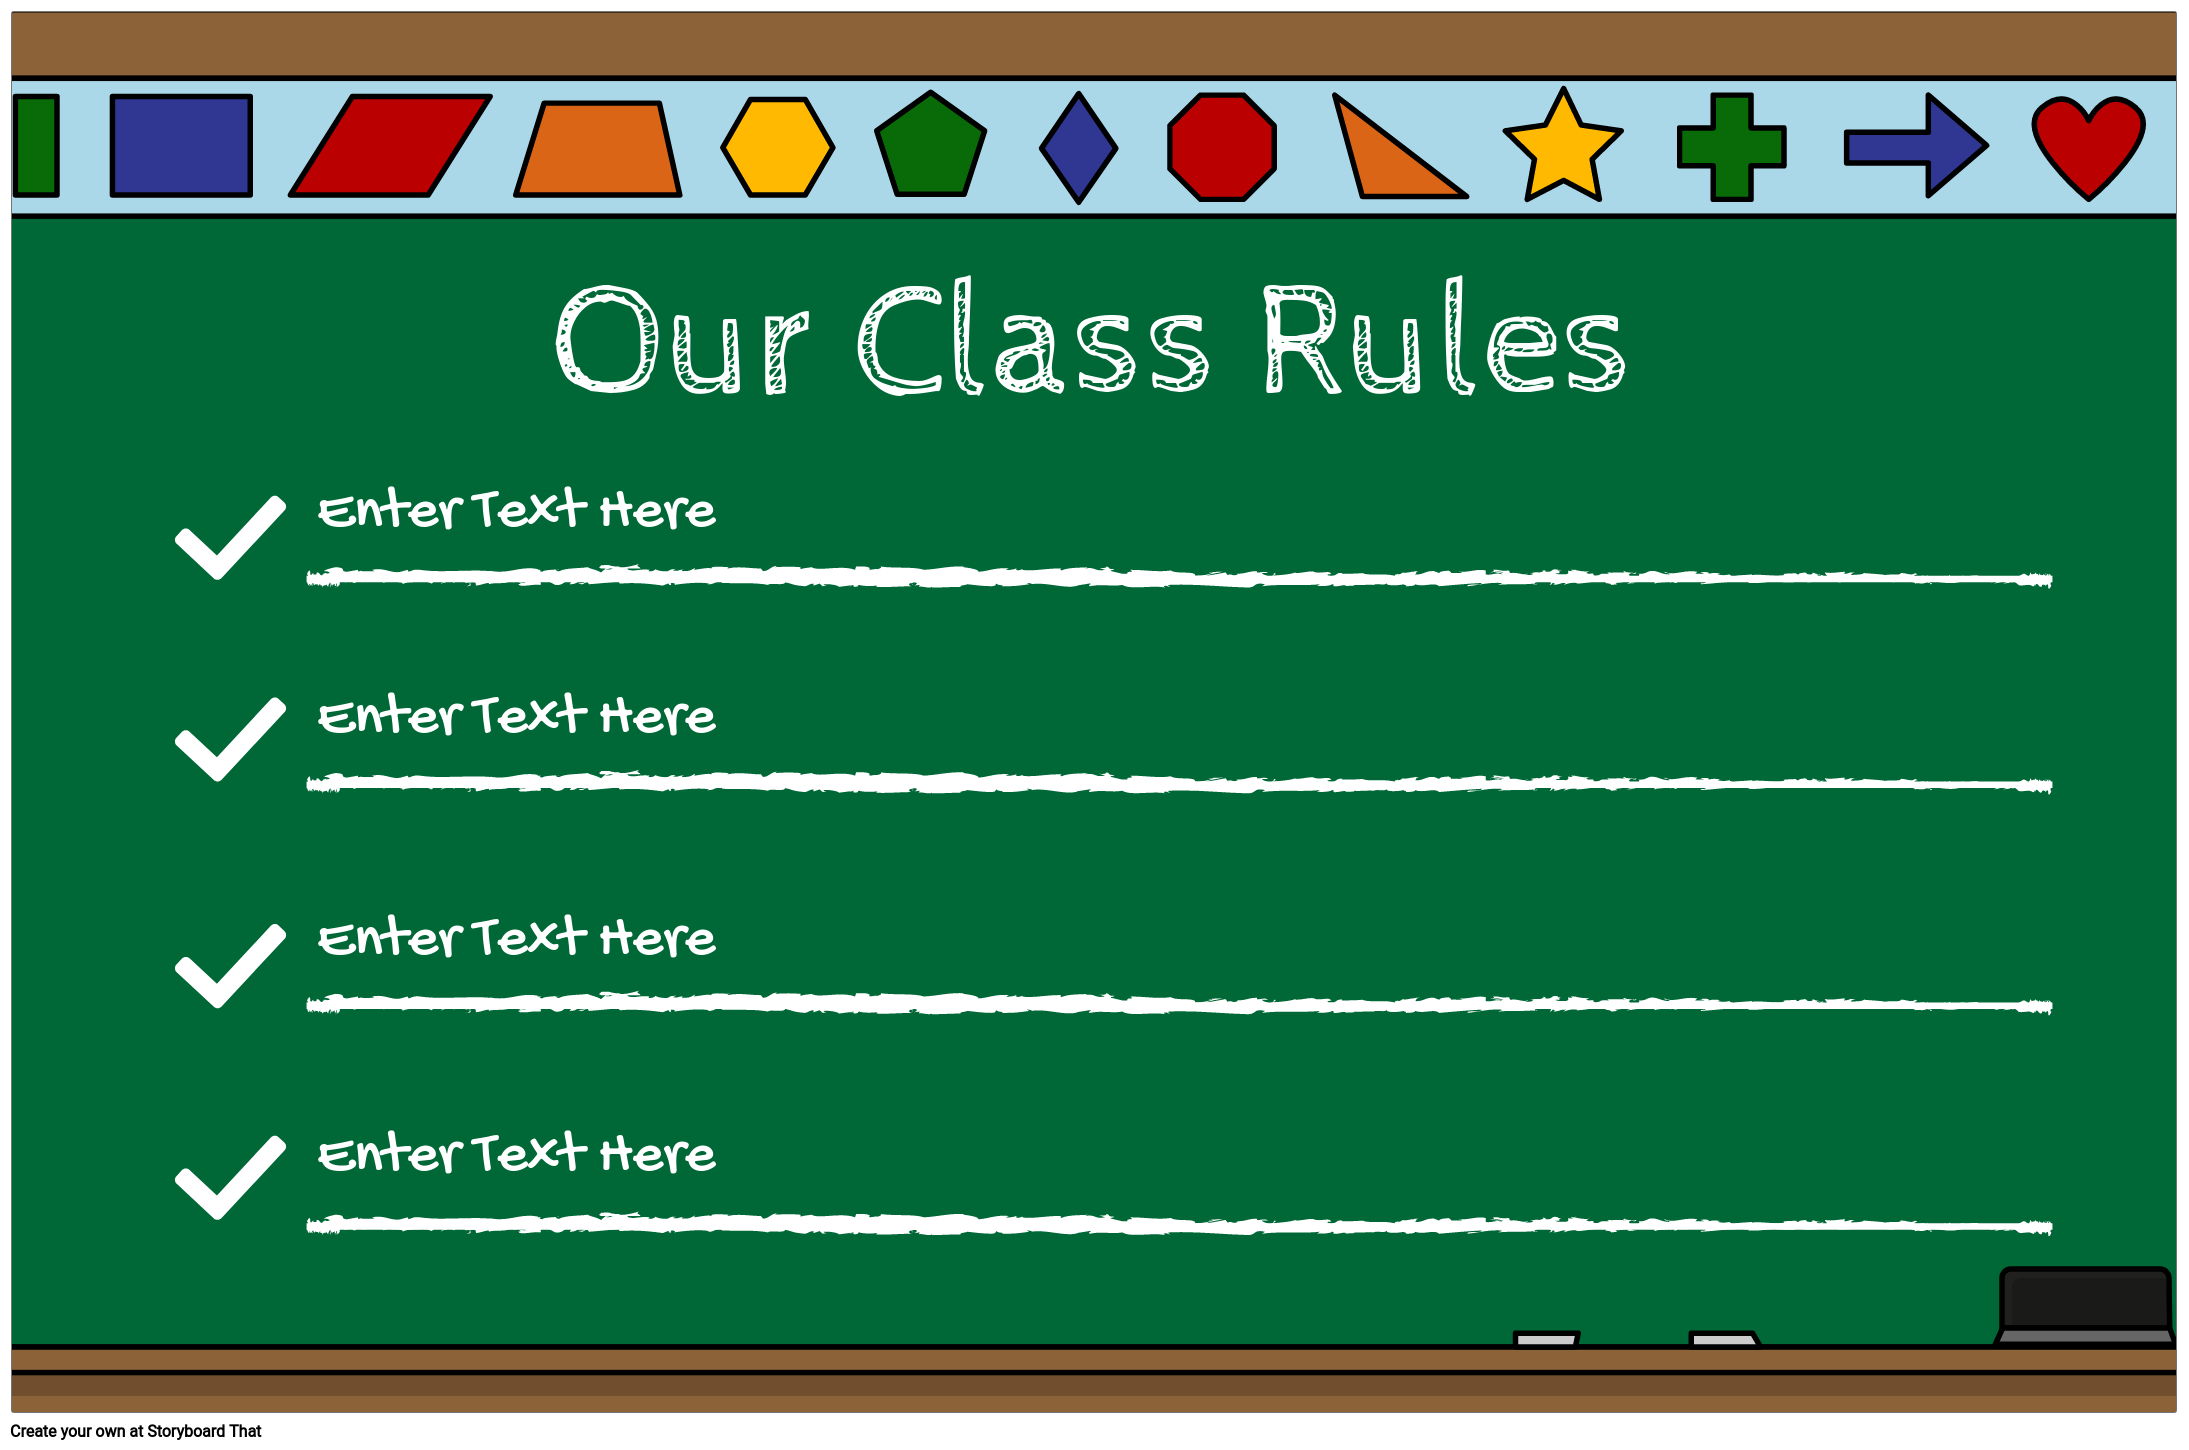 classroom-rules-22-storyboard-by-poster-templates